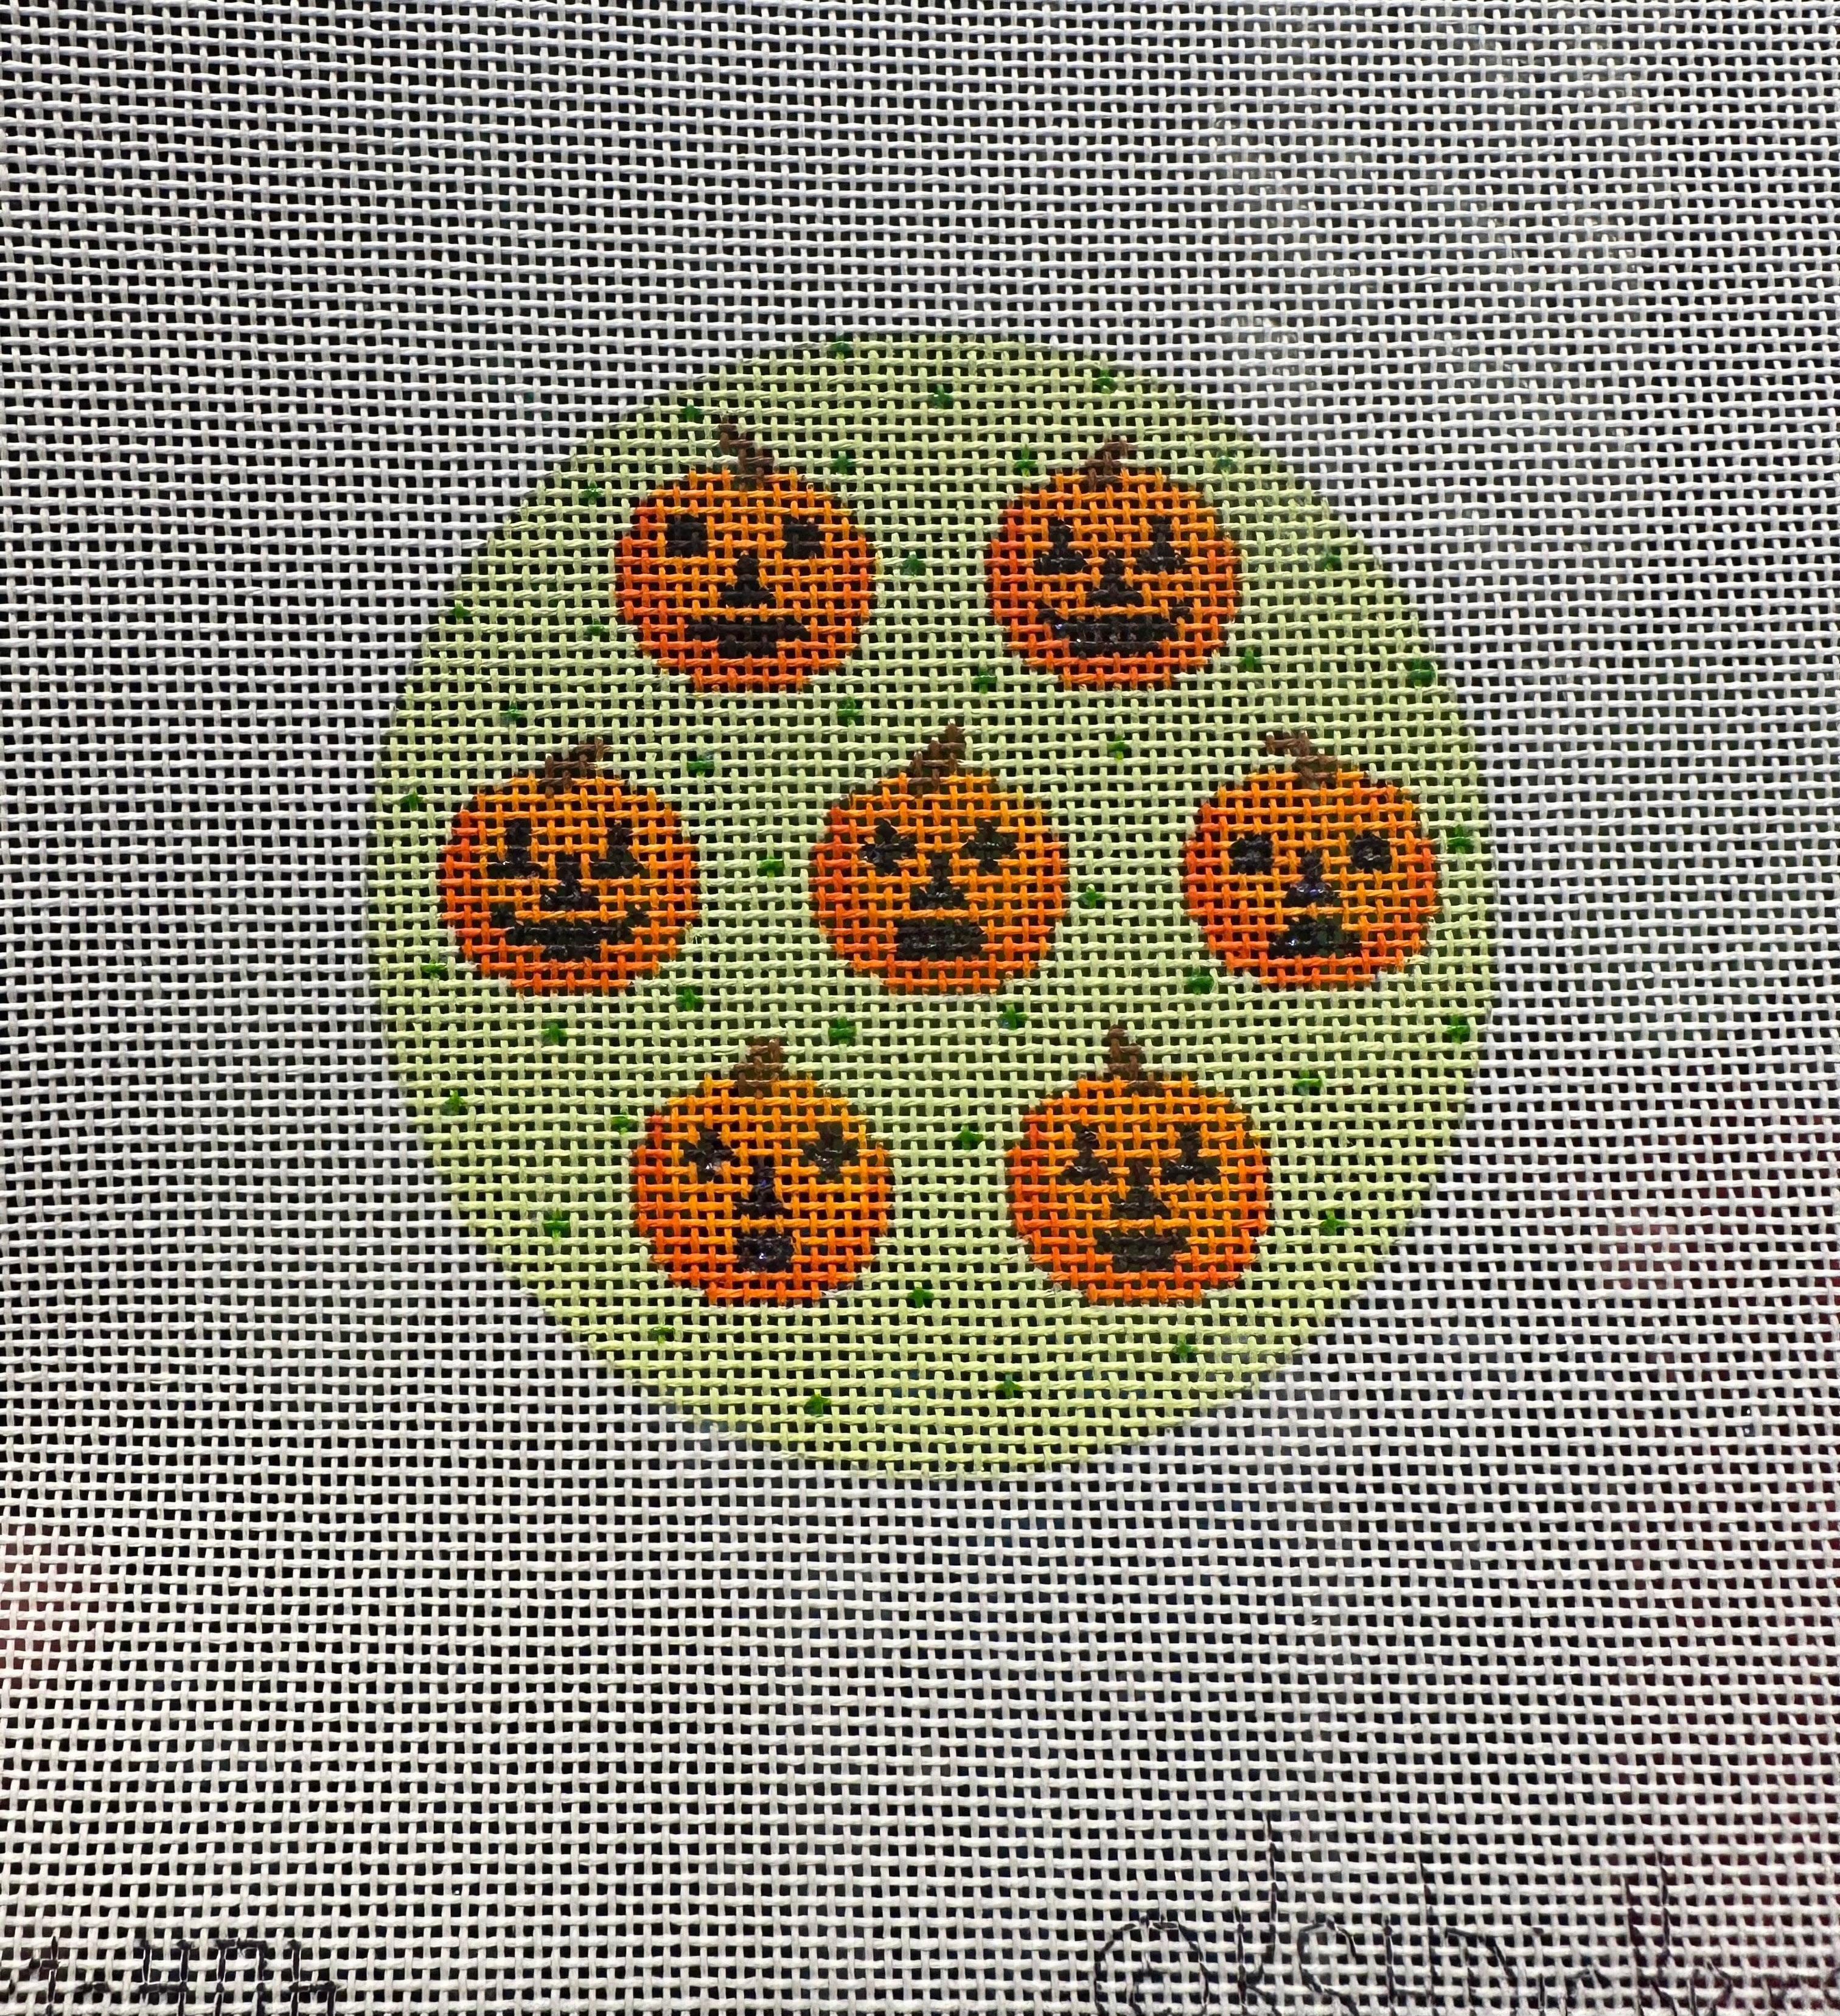 Kate Dickerson OM-406 Jack-o-Lanterns on Dotted Soft Green